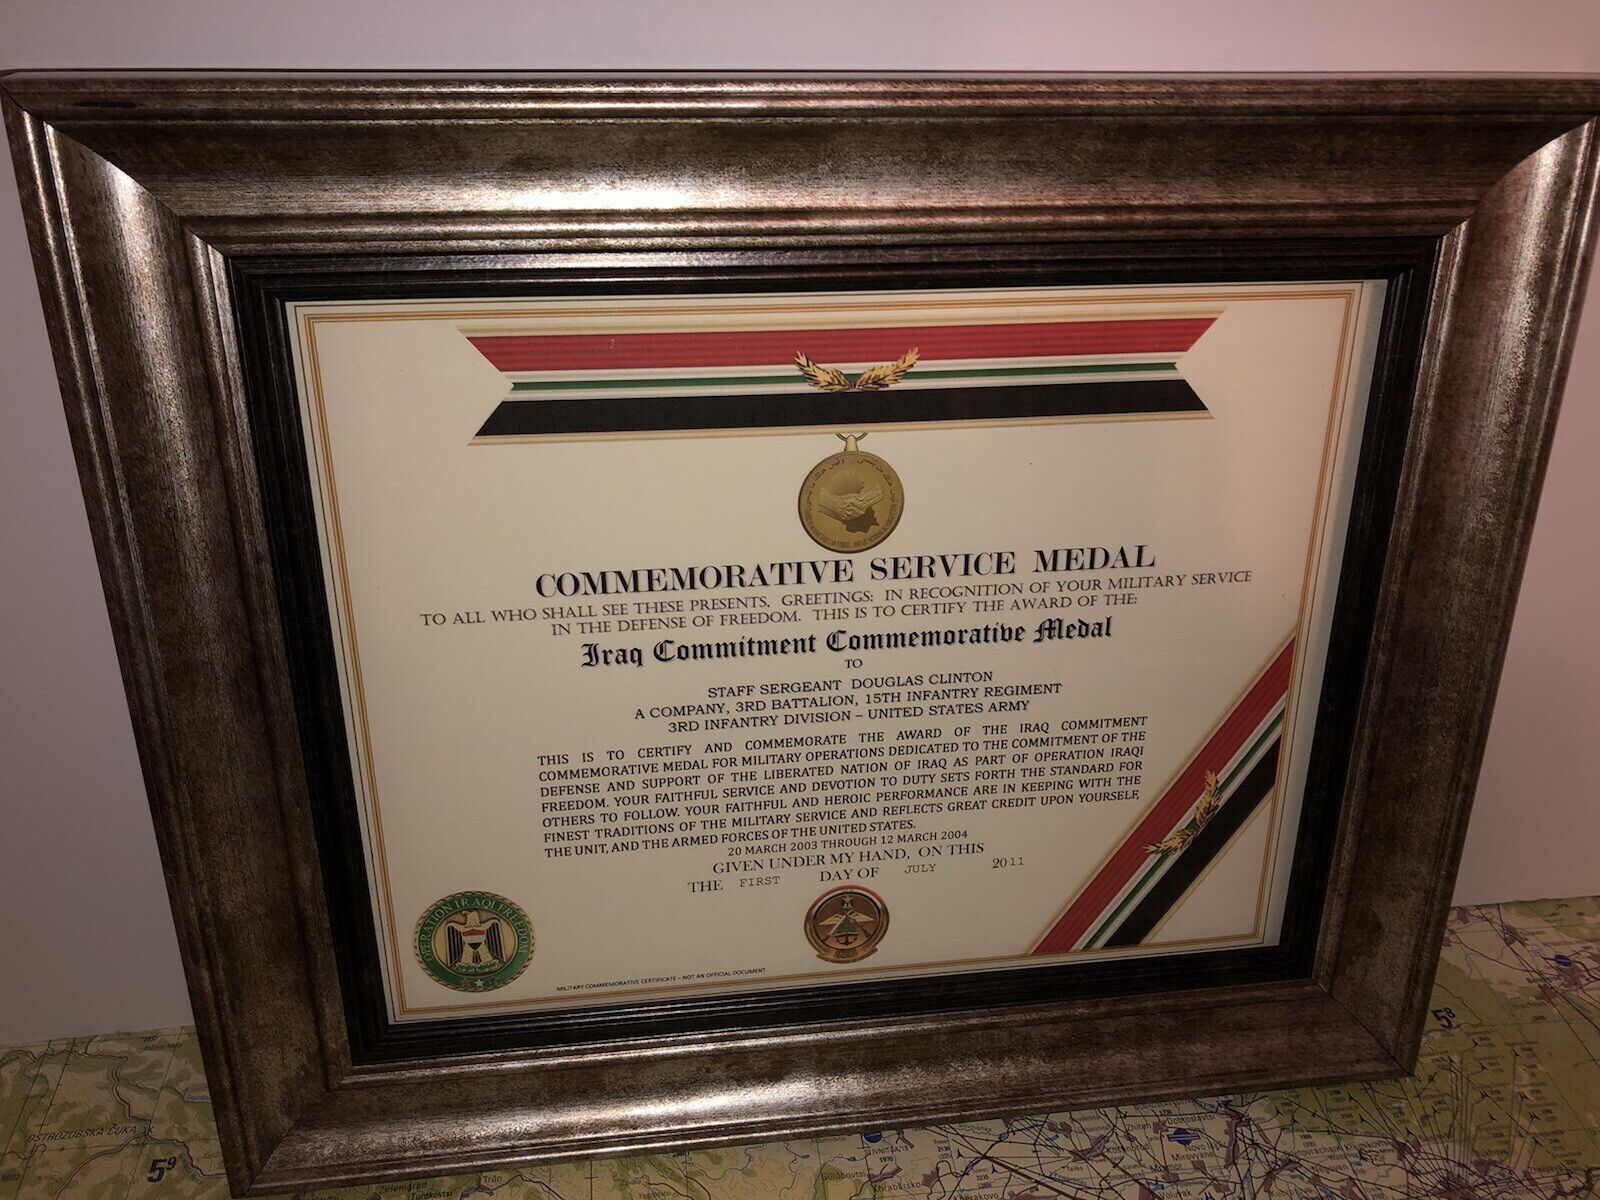 IRAQ COMMITMENT COMMEMORATIVE MEDAL CERTIFICATE ~ Type 1